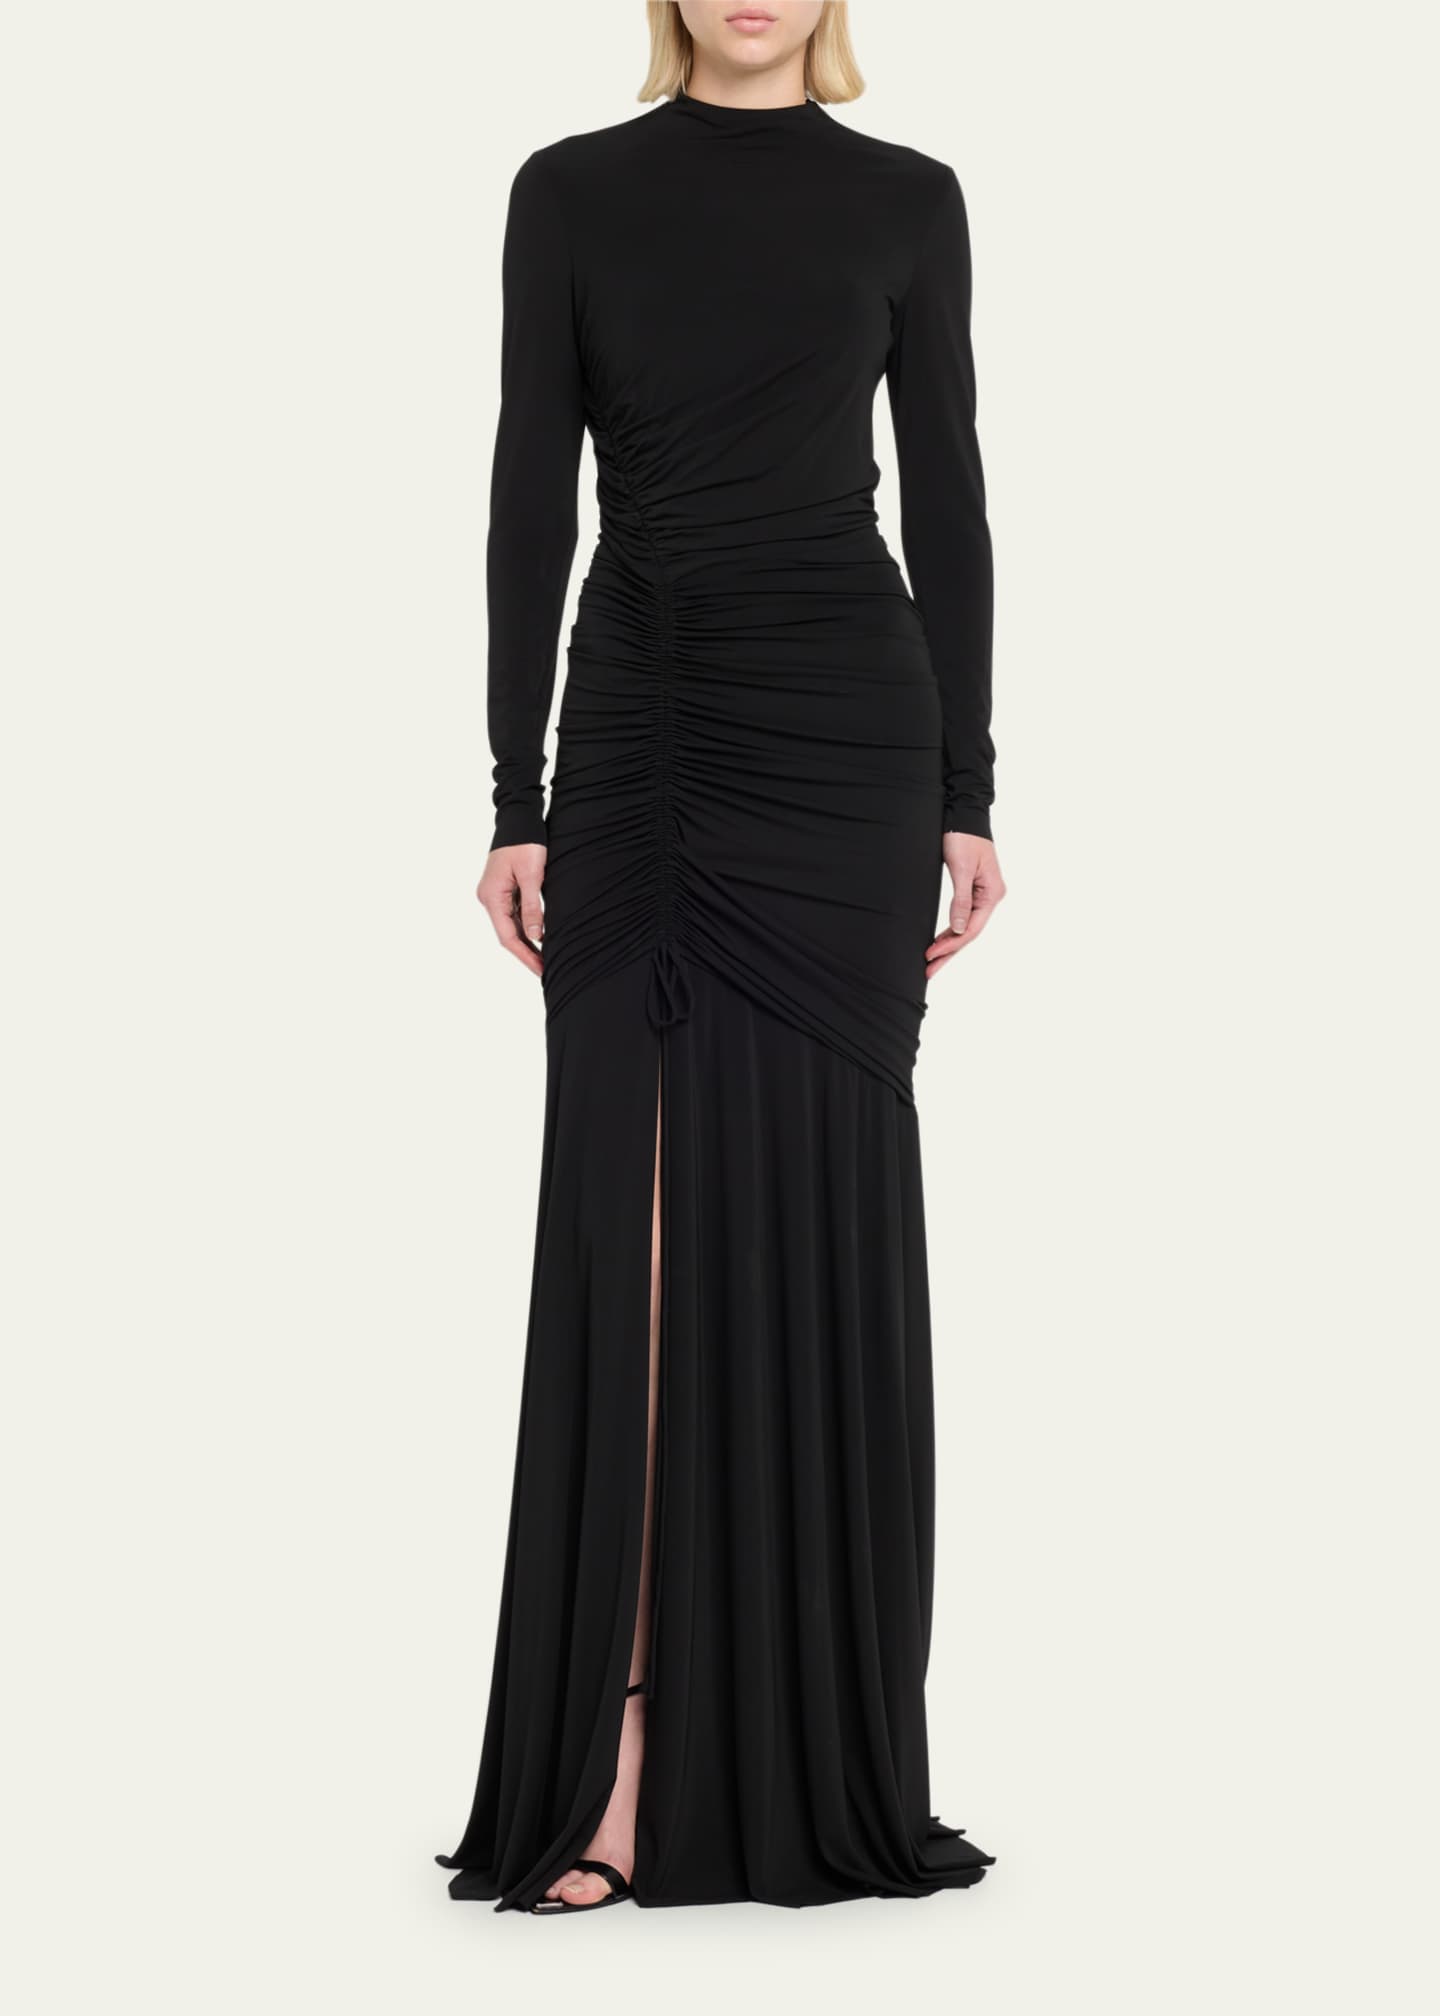 Jason Wu Collection Ruched High-Neck Jersey Gown - Bergdorf Goodman